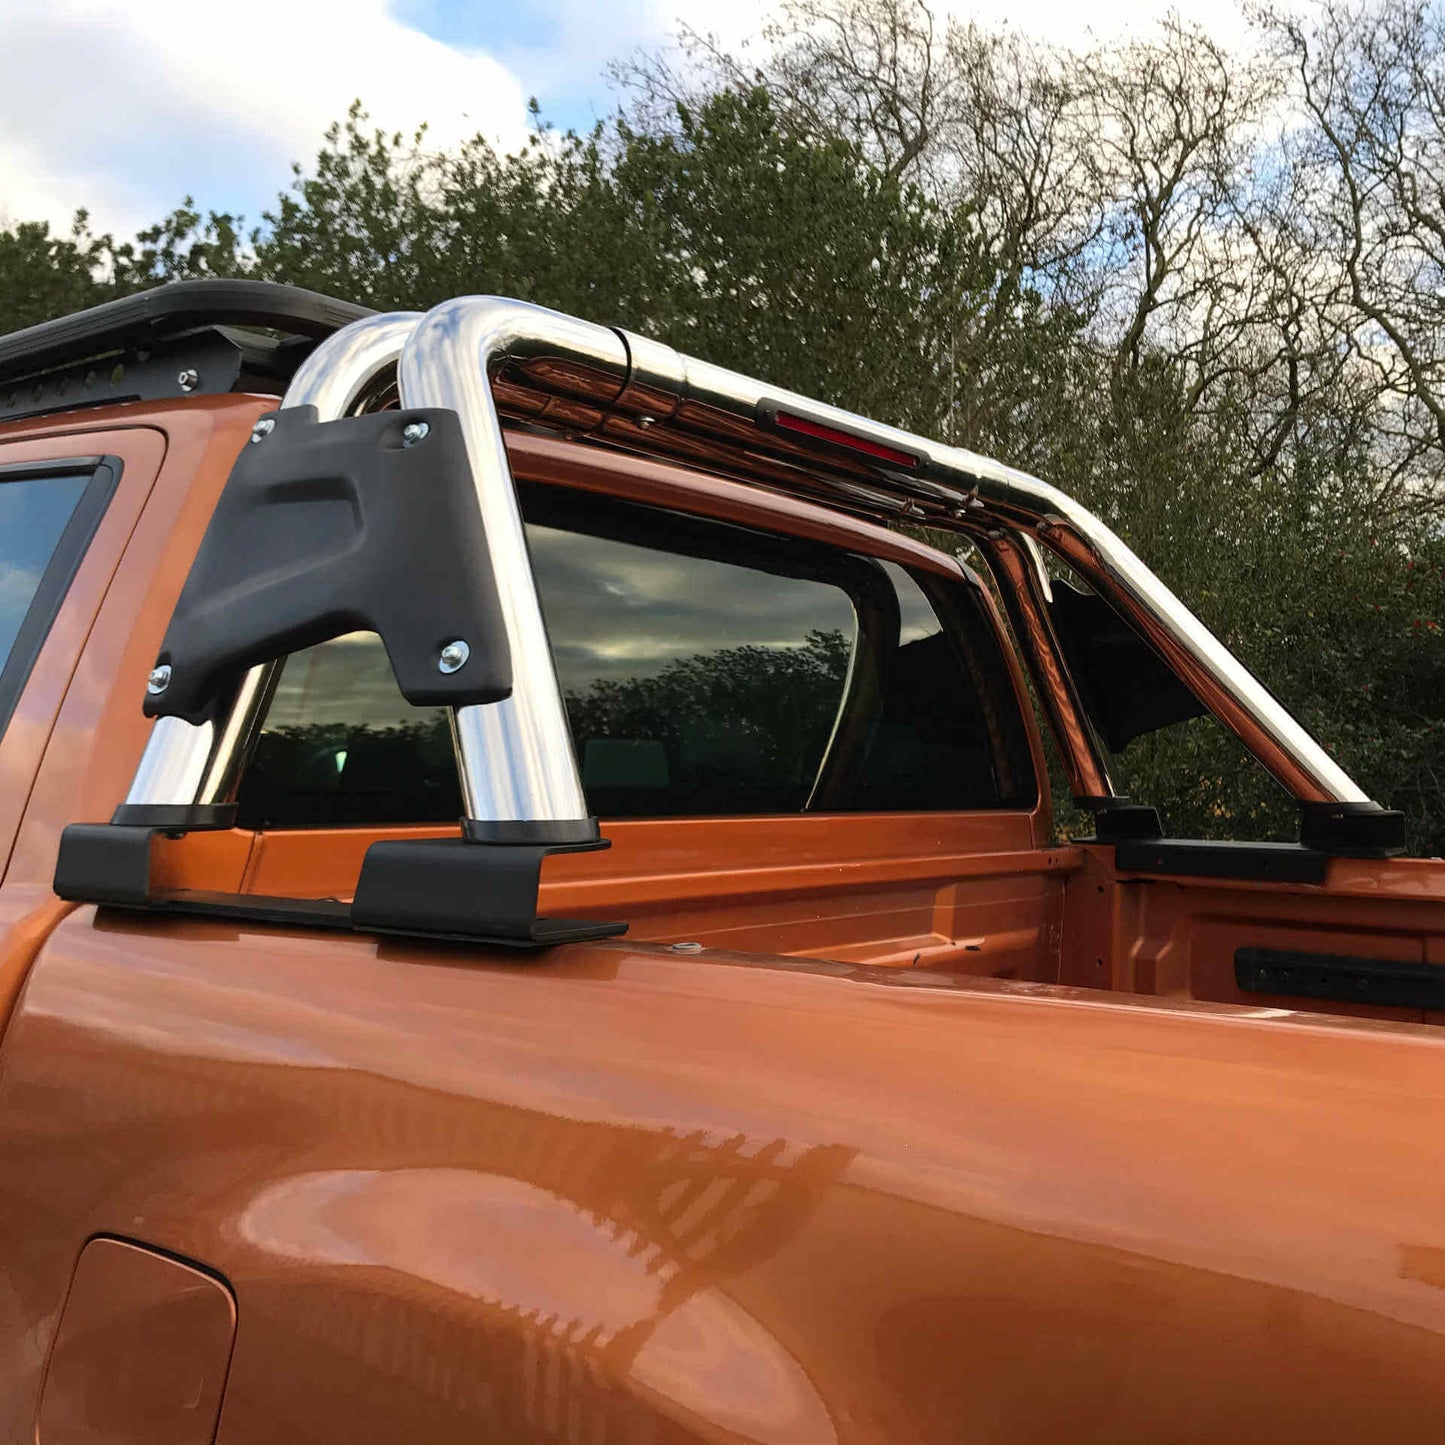 Stainless Steel Side Infill Roll Sports Bar for Ford Ranger 2012+ -  - sold by Direct4x4